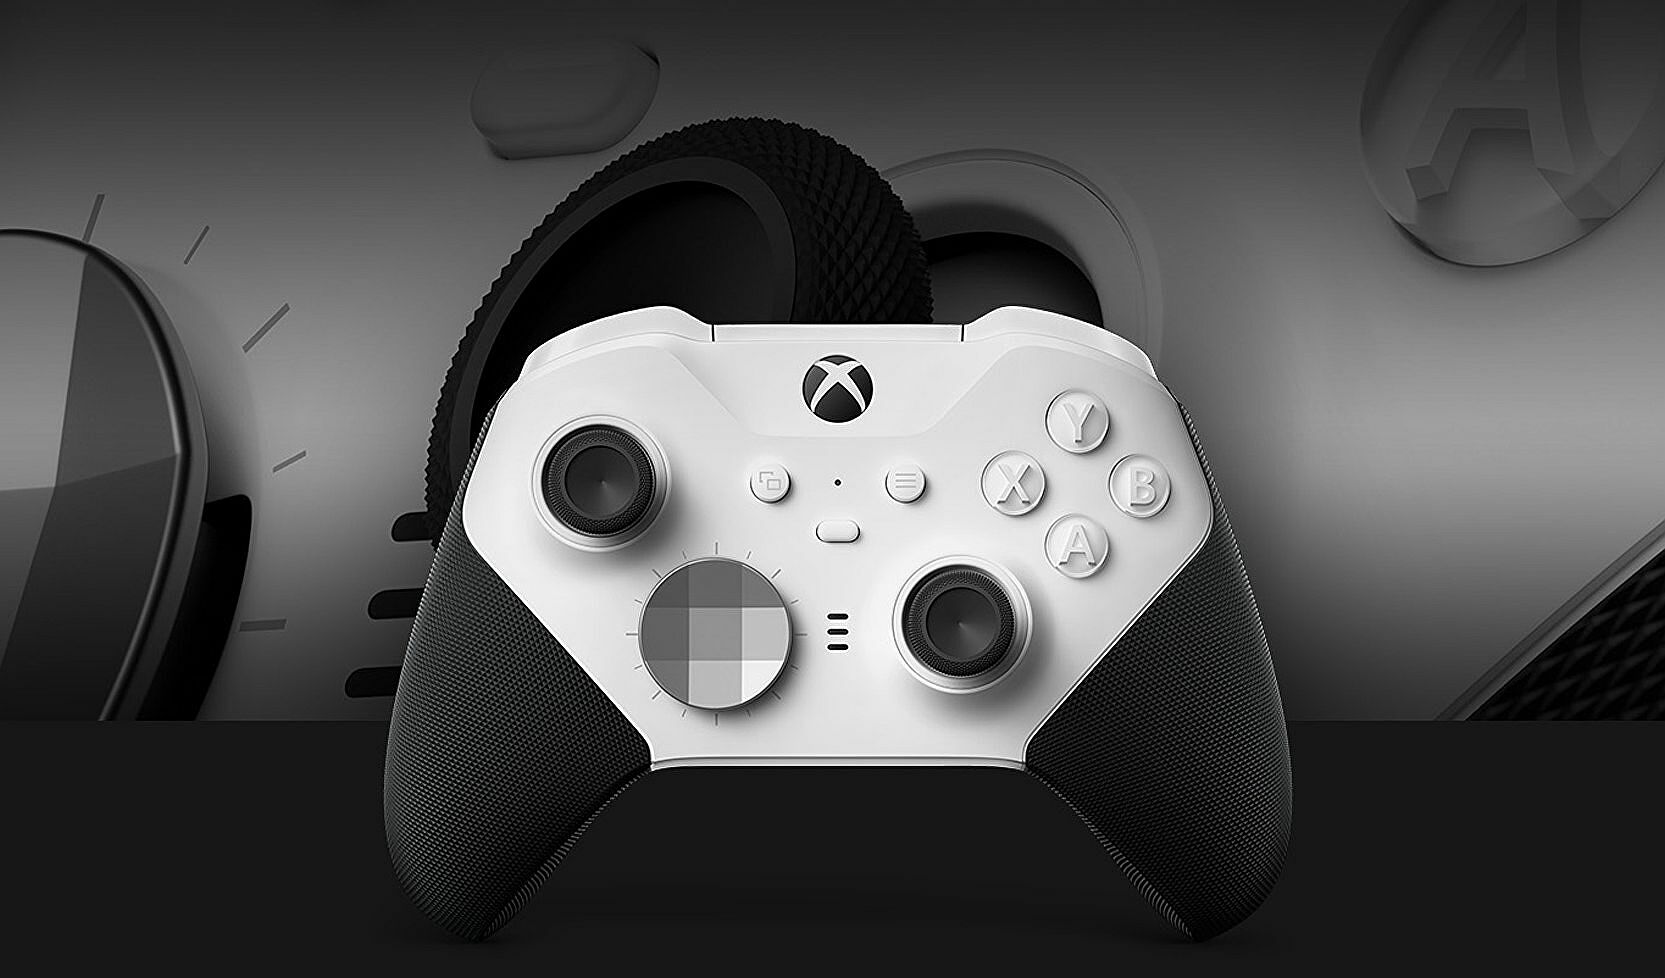 Xbox Elite Wireless Controller Series 2 – Core is a less expensive version of the current model